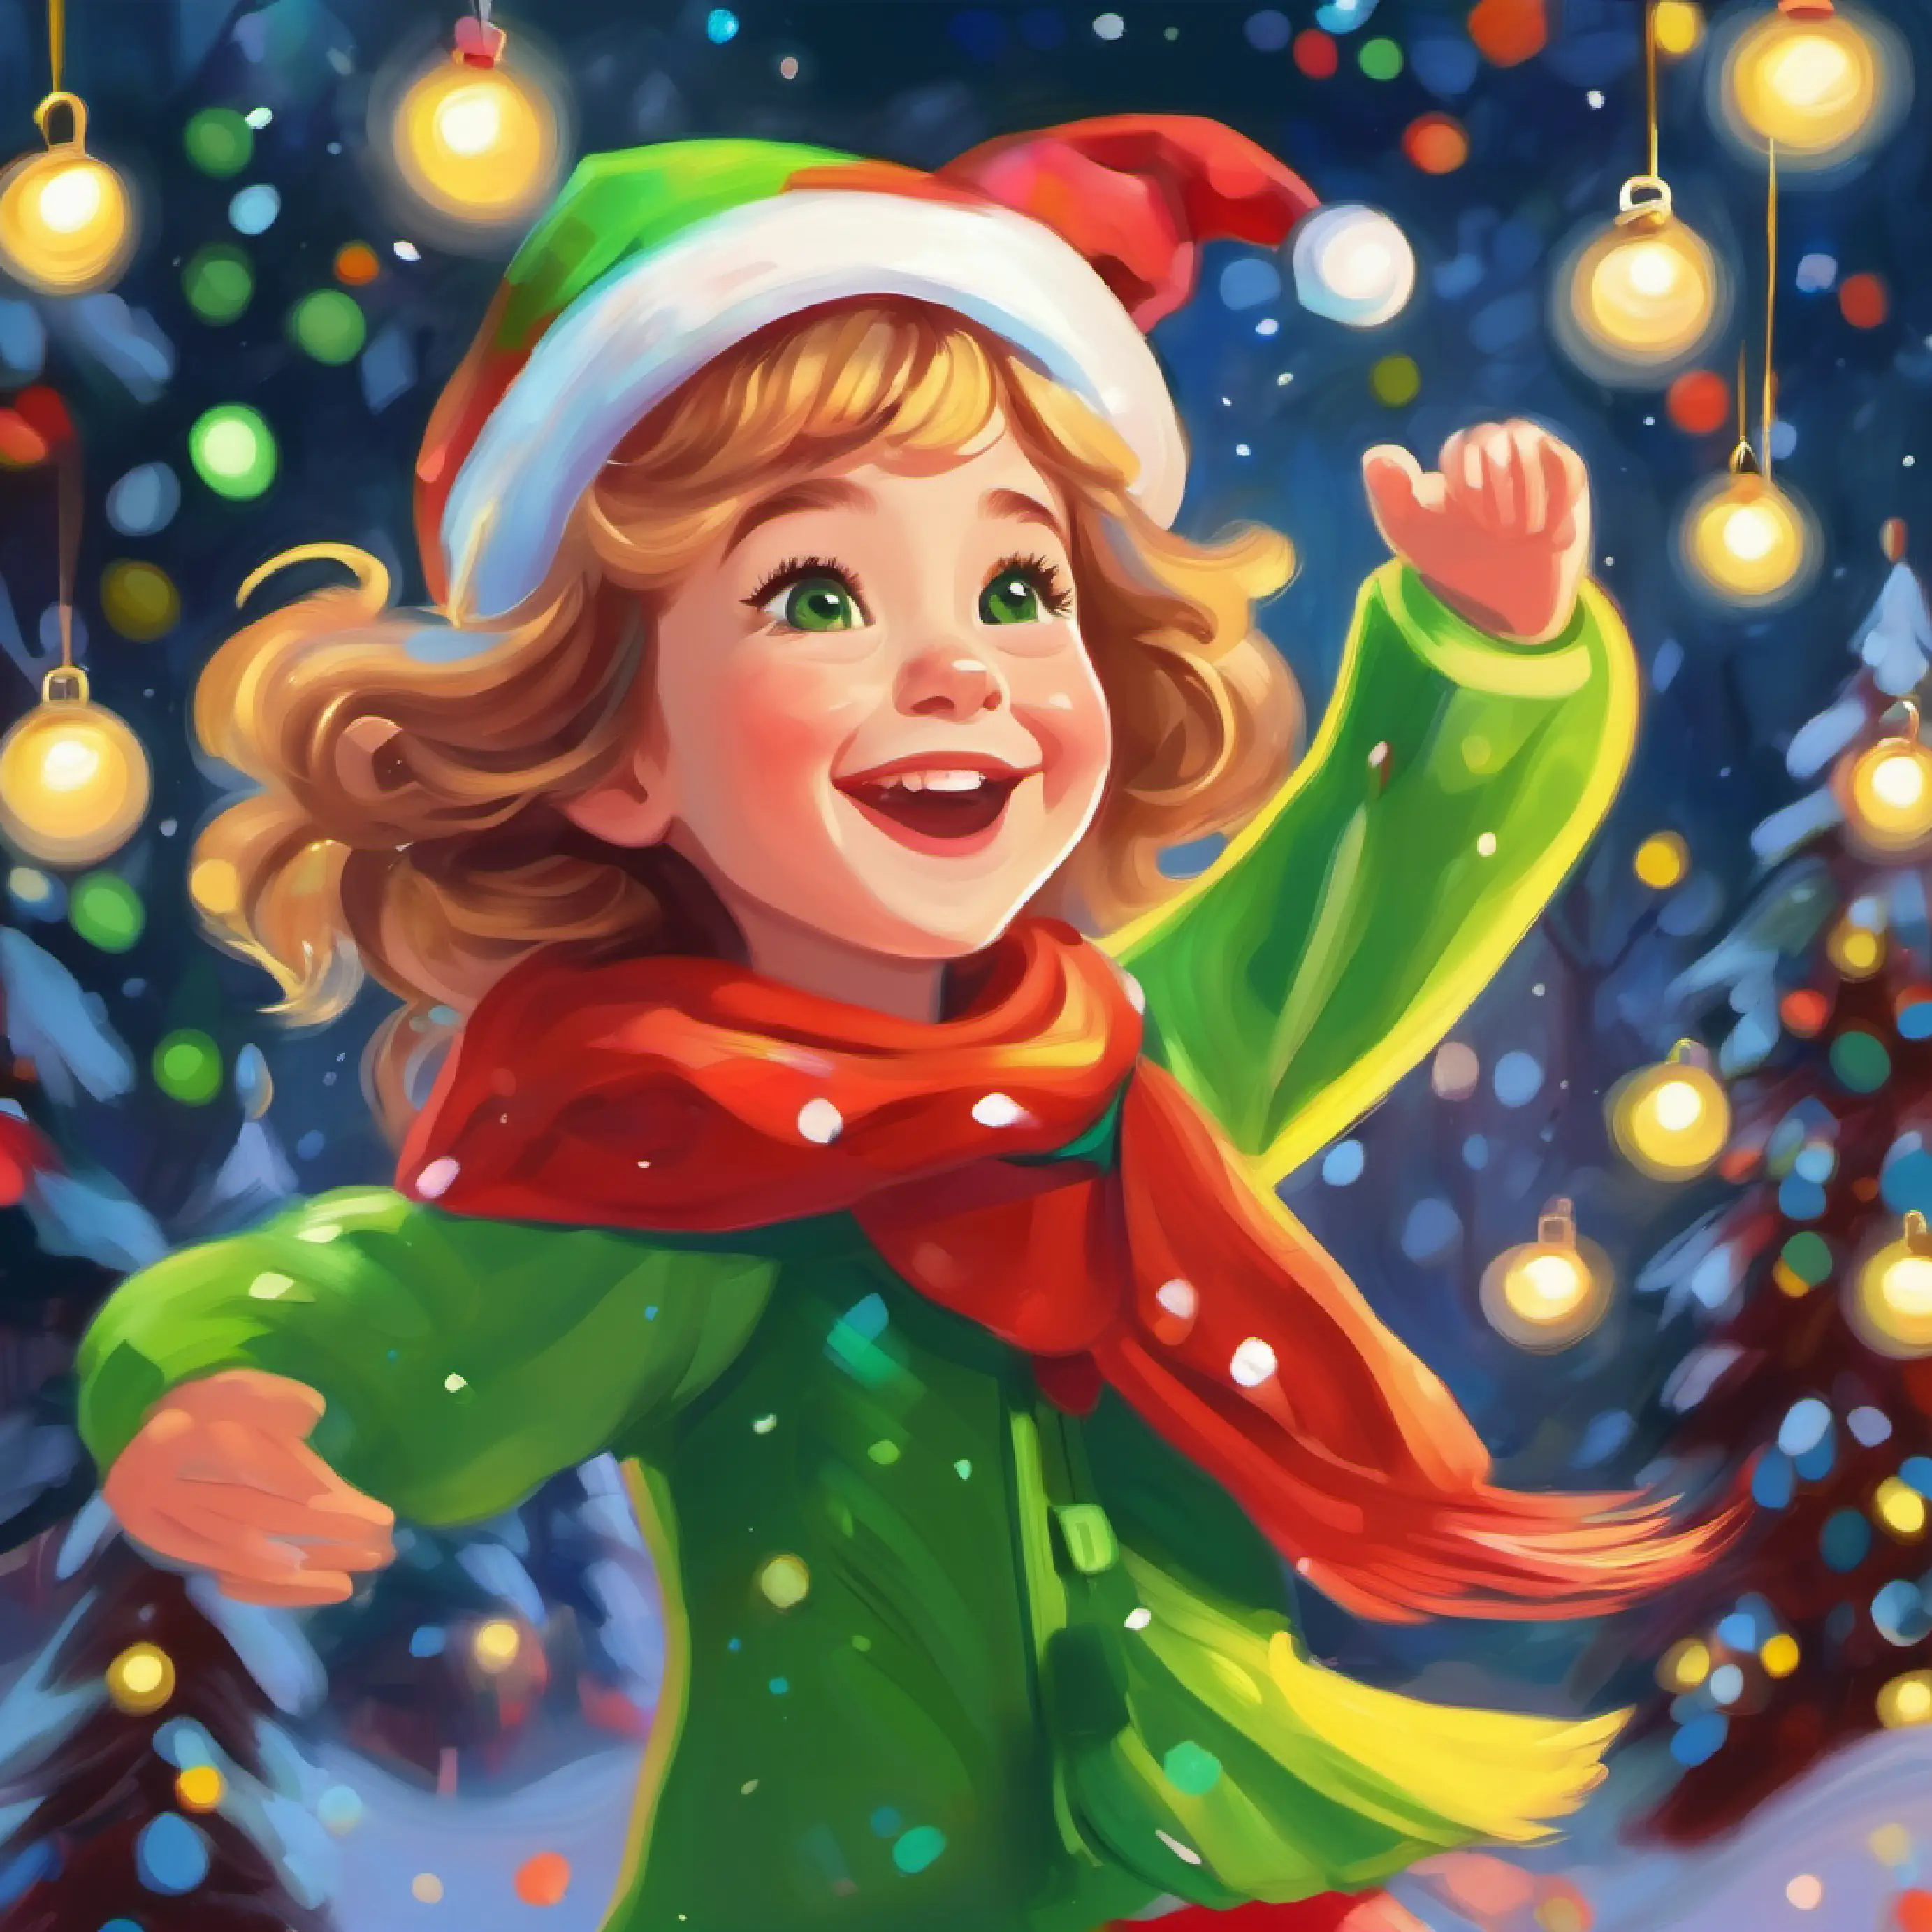 Young girl, cheerful, light-skinned, with bright green eyes smiling, discovering joy in dancing for herself.